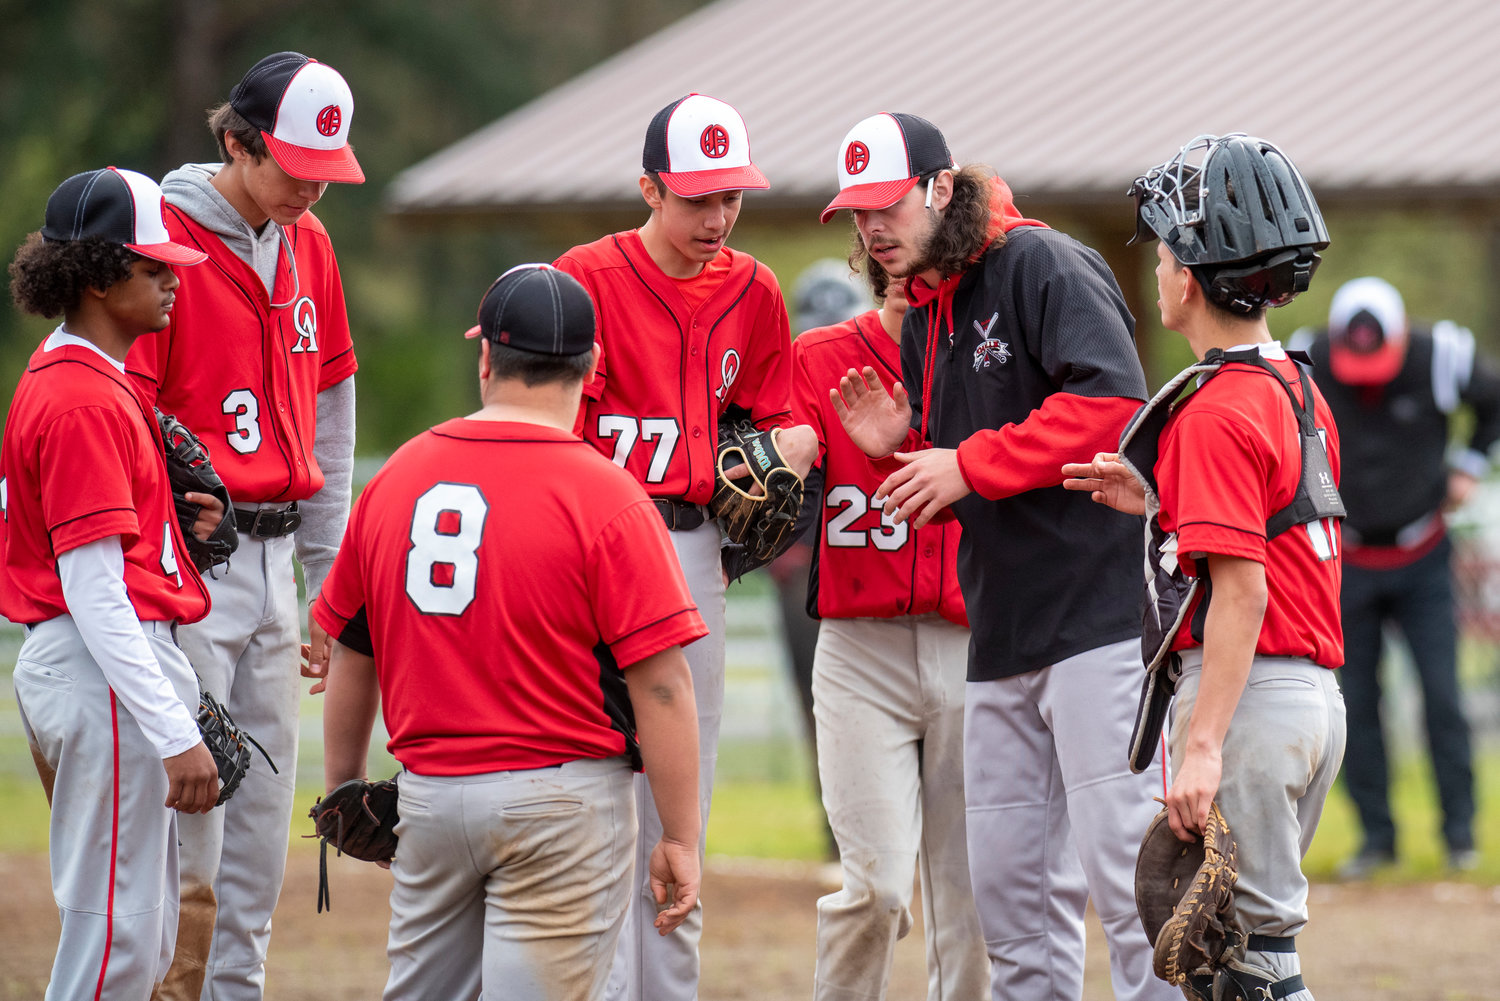 Oakville coach Connor Bensen talks to his team during a home game against Mossyrock at Legends Field Complex on April 28.